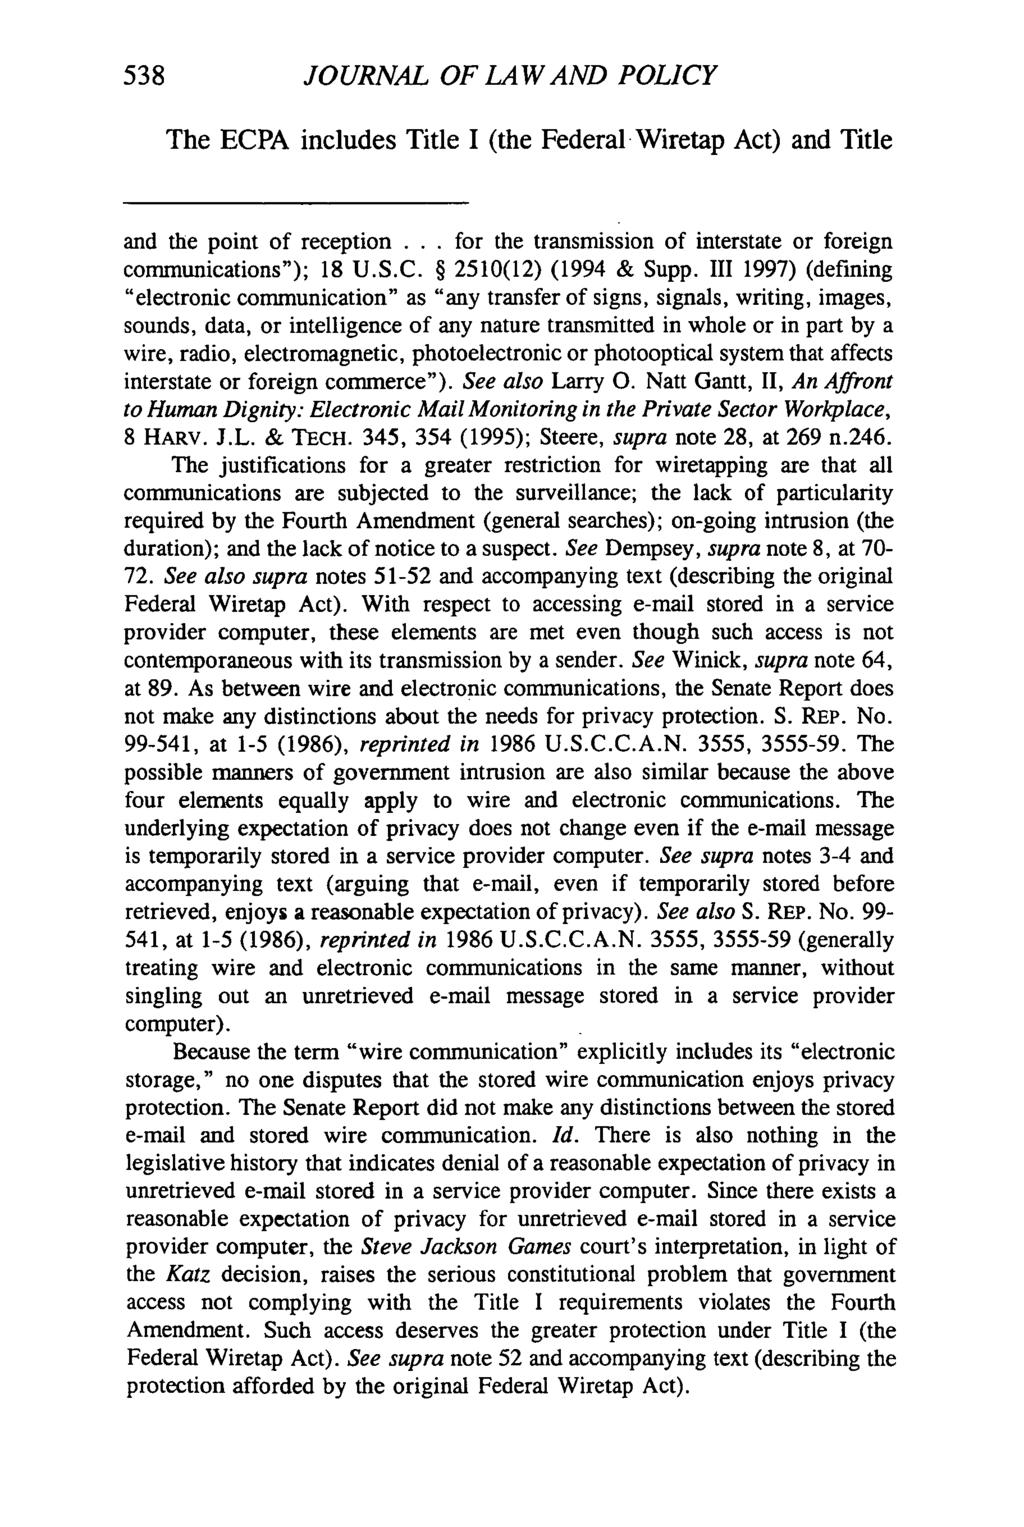 538 JOURNAL OF LAW AND POLICY The ECPA includes Title I (the Federal Wiretap Act) and Title and the point of reception... for the transmission of interstate or foreign communications"); 18 U.S.C. 2510(12) (1994 & Supp.